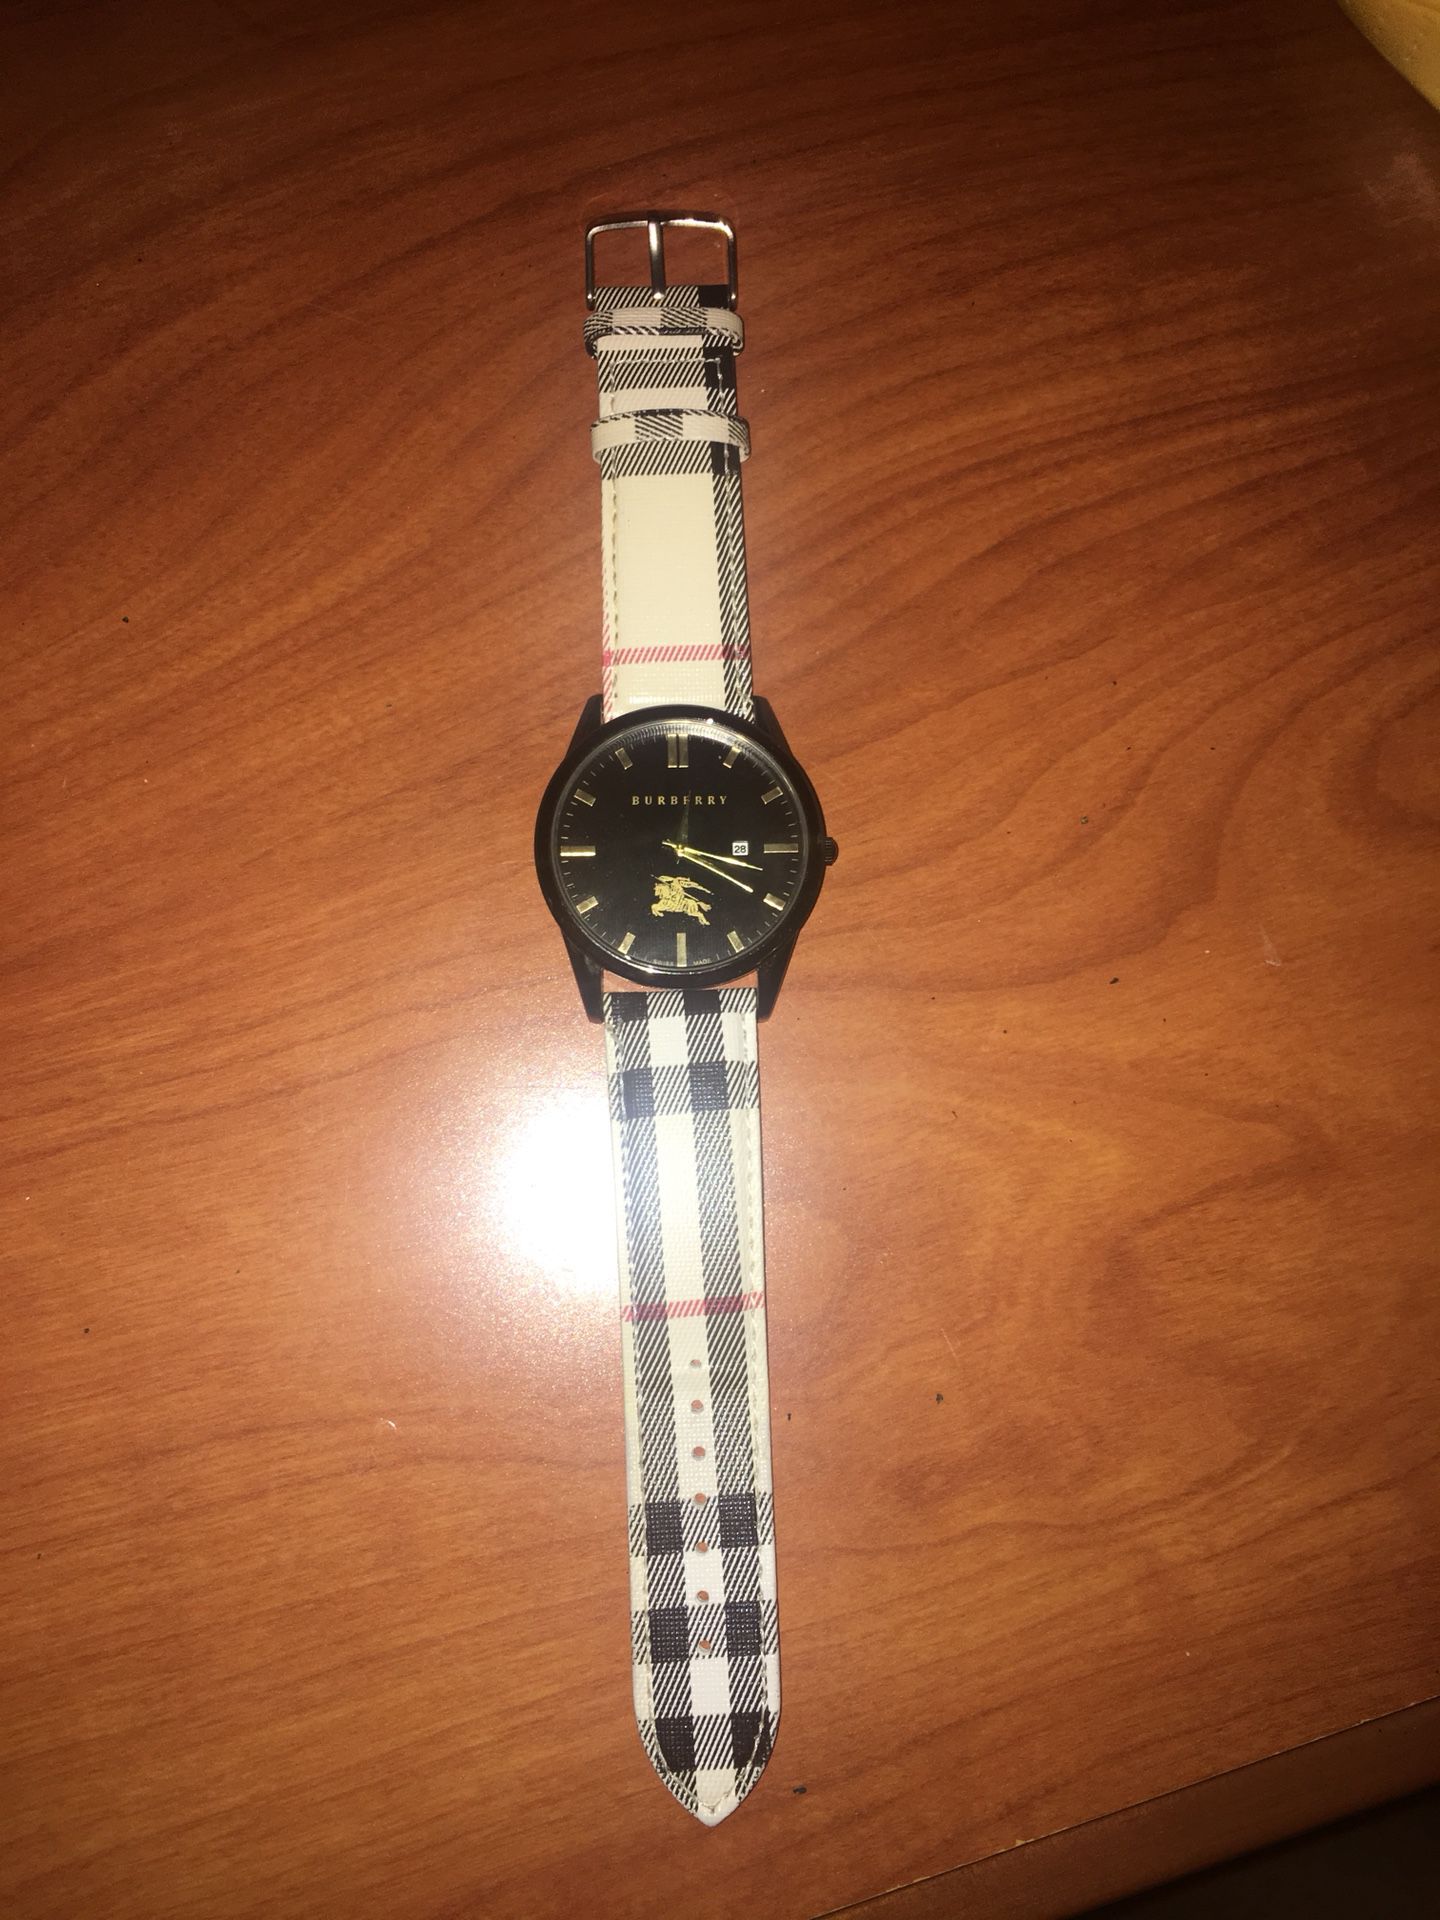 Burberry watch for Sale in Concord, NC - OfferUp